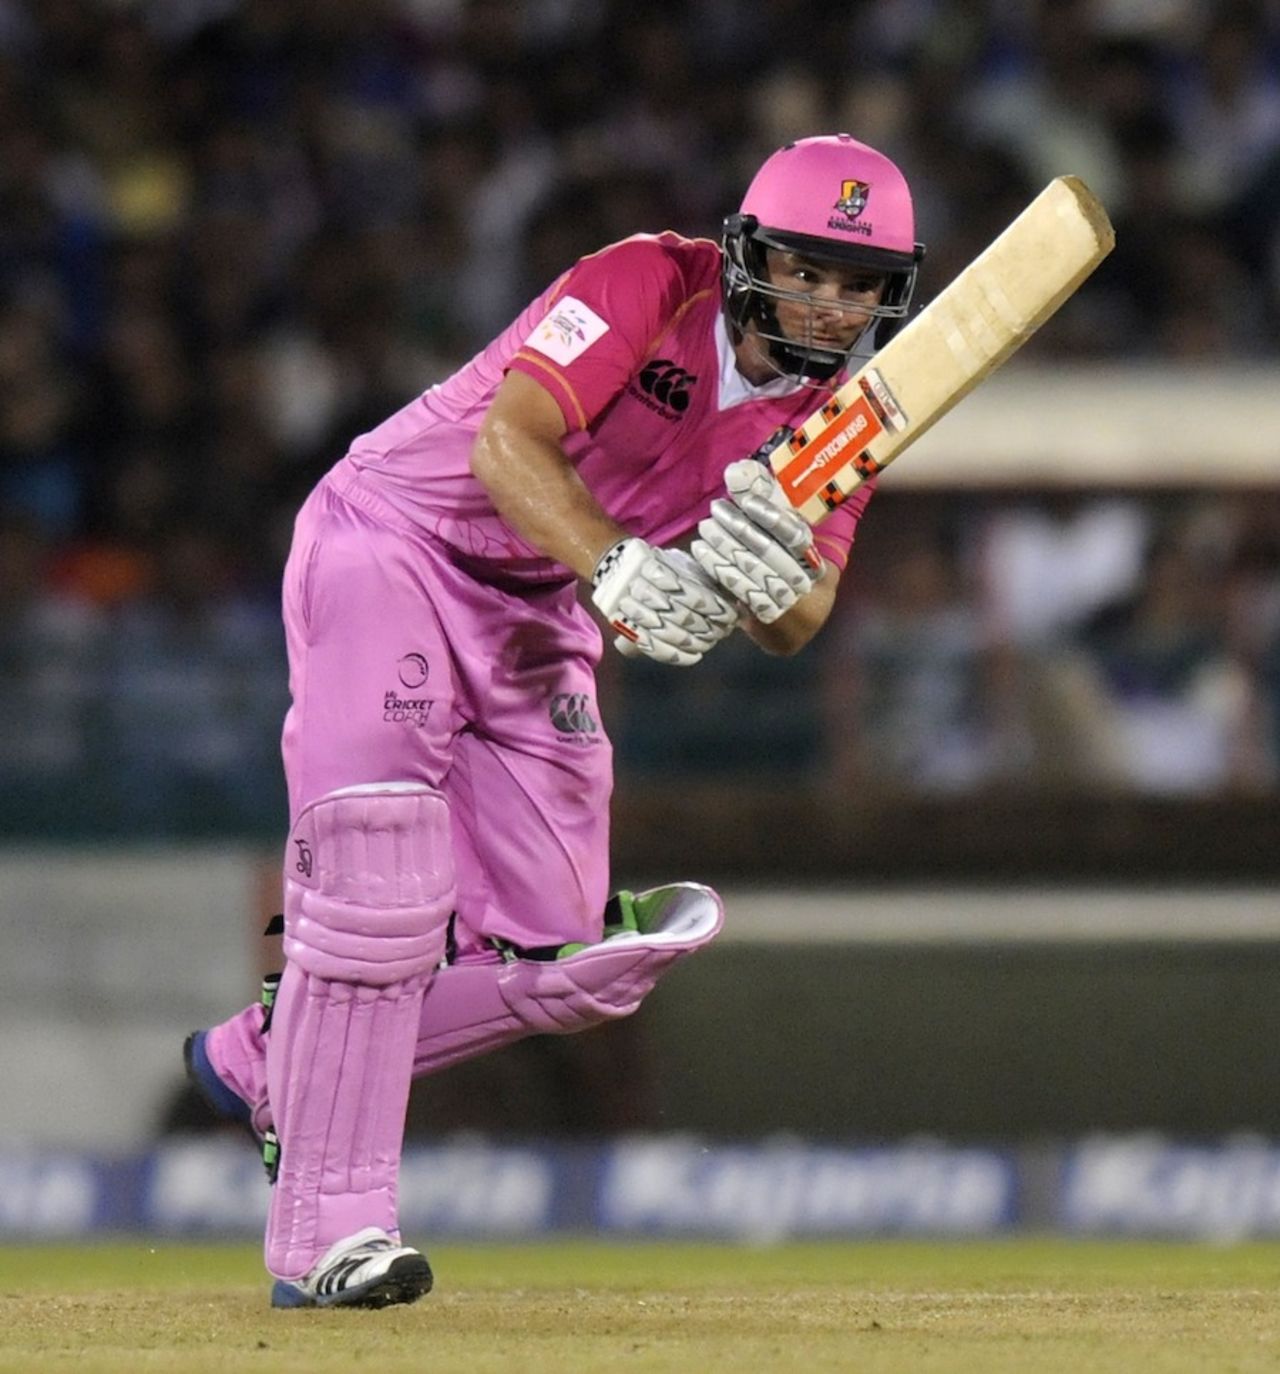 Daniel Flynn made 14 in the chase, Northern Knights v Southern Express, CLT20 qualifier, Raipur, September 13, 2014